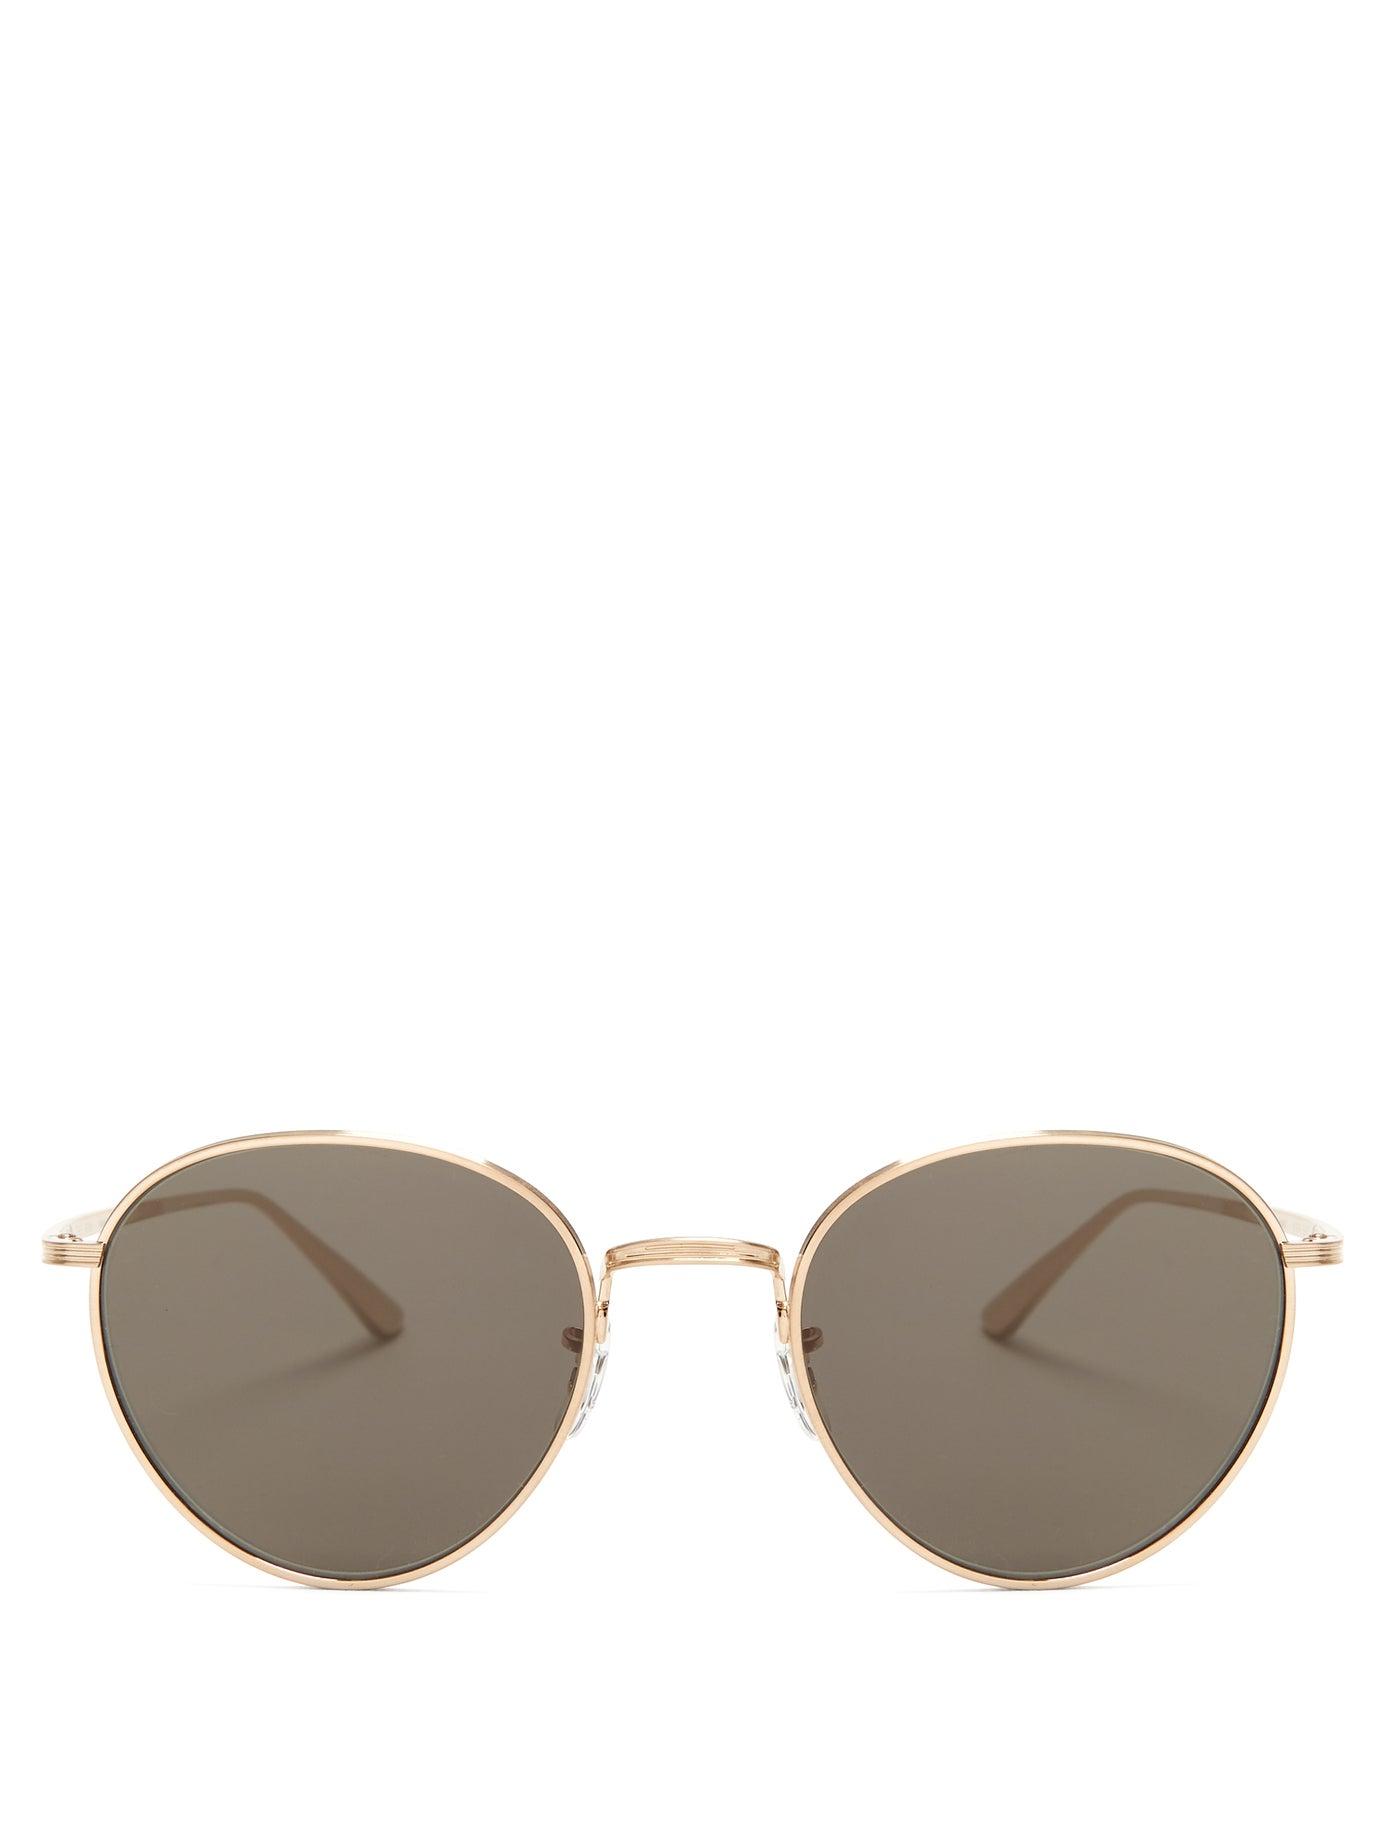 The Row X Oliver Peoples Brownstone 2 Sunglasses in Metallic